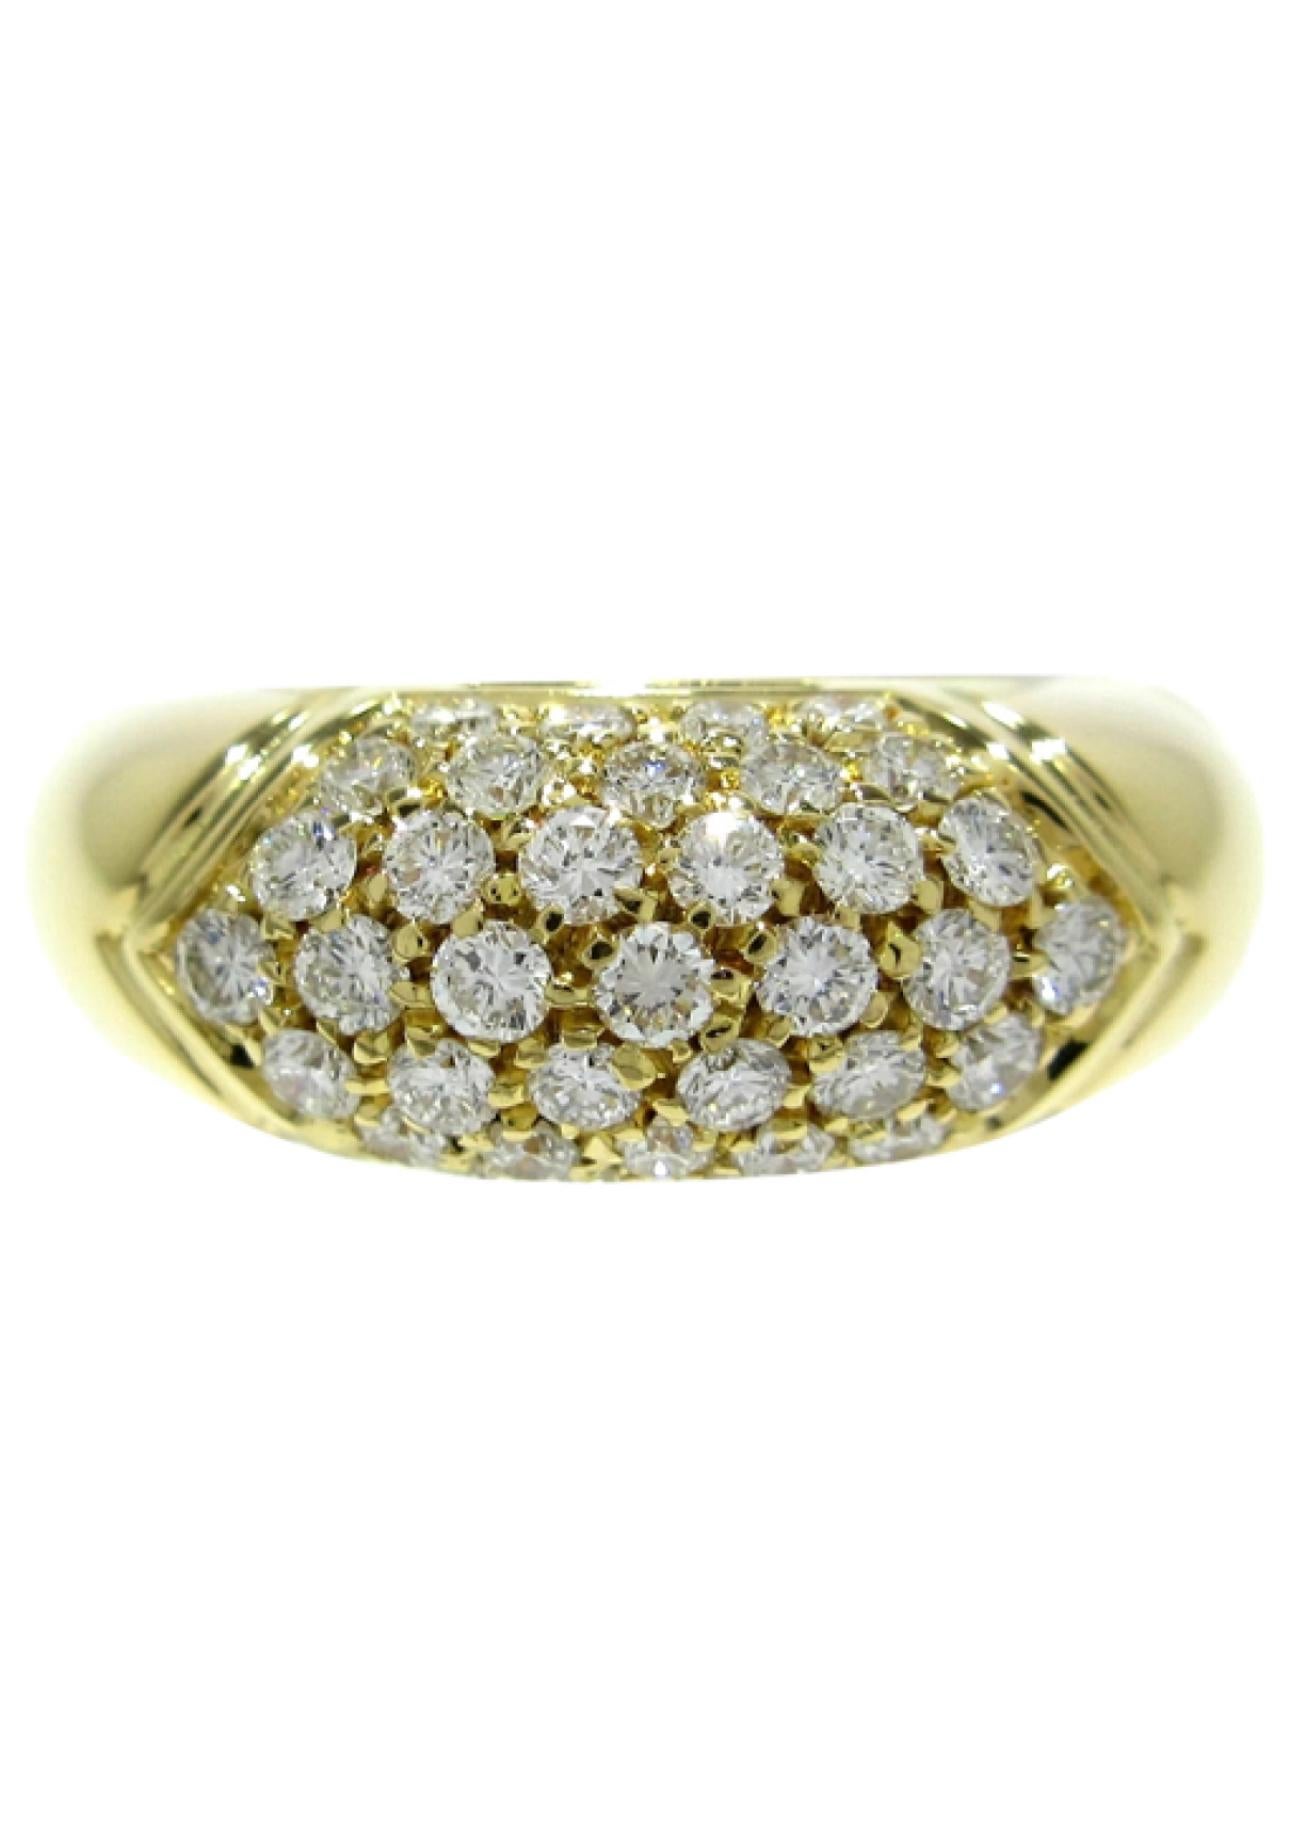 Vintage Glamour Tronchetto ring designed by Bvlgari.

A geometric ring band, crafted in Rome Italy by the house of Bulgari in solid yellow  18k gold, it features 1 carats of colorless sparkling Round brilliant cut Diamonds. Dated 1980'.

Has a total